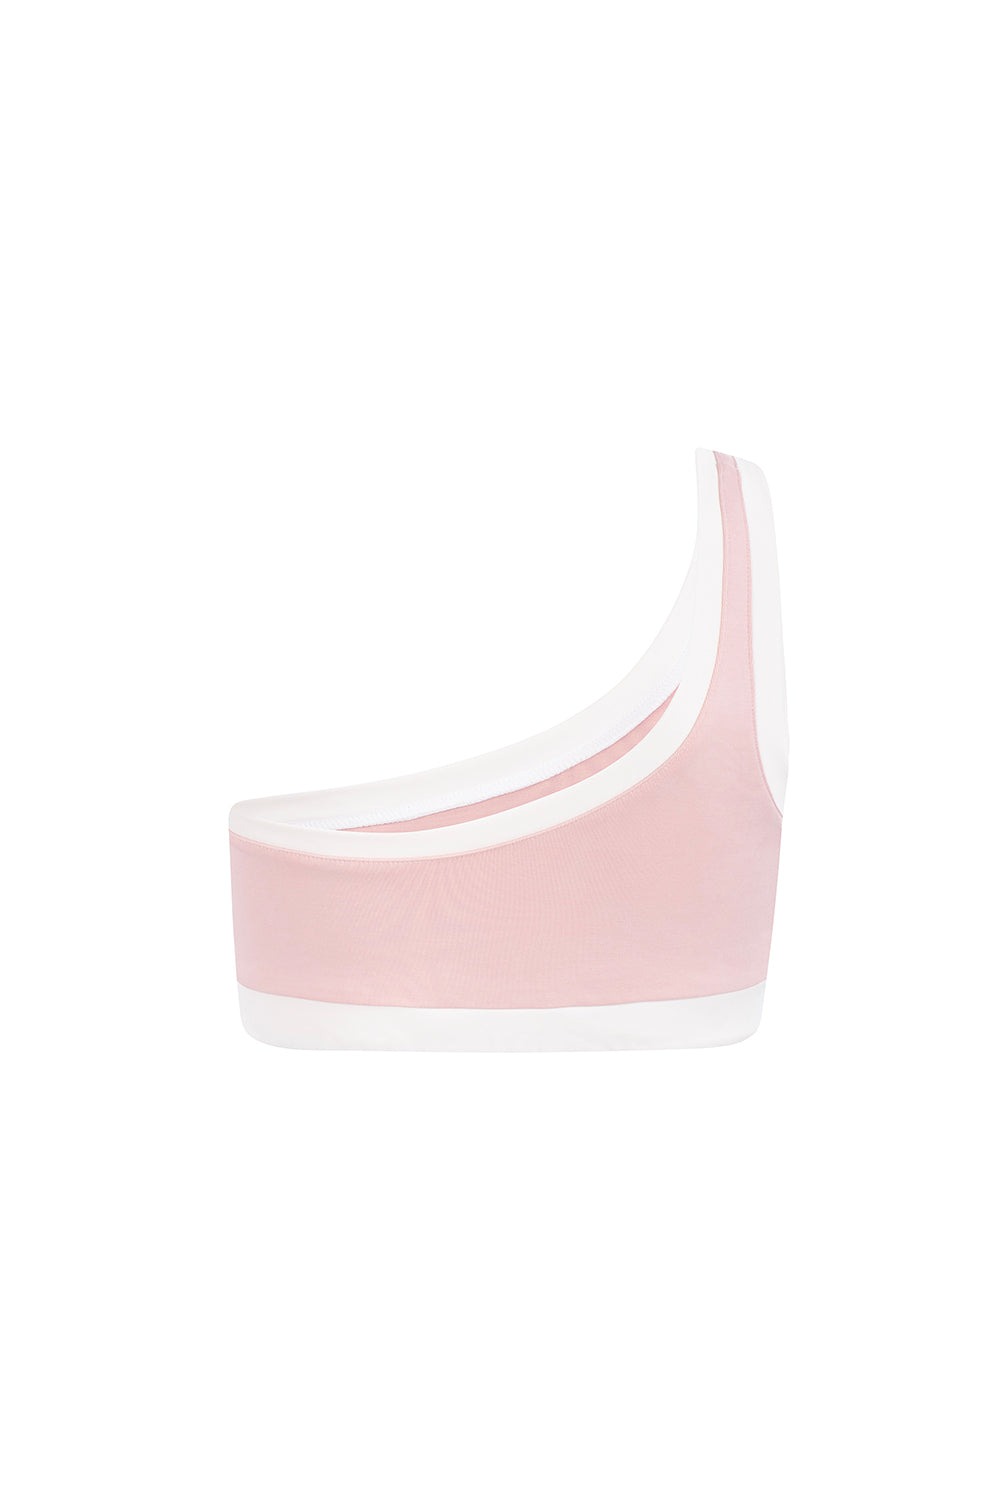 SOFT TOUCH ONE SHOULDER PINK CROP TOP